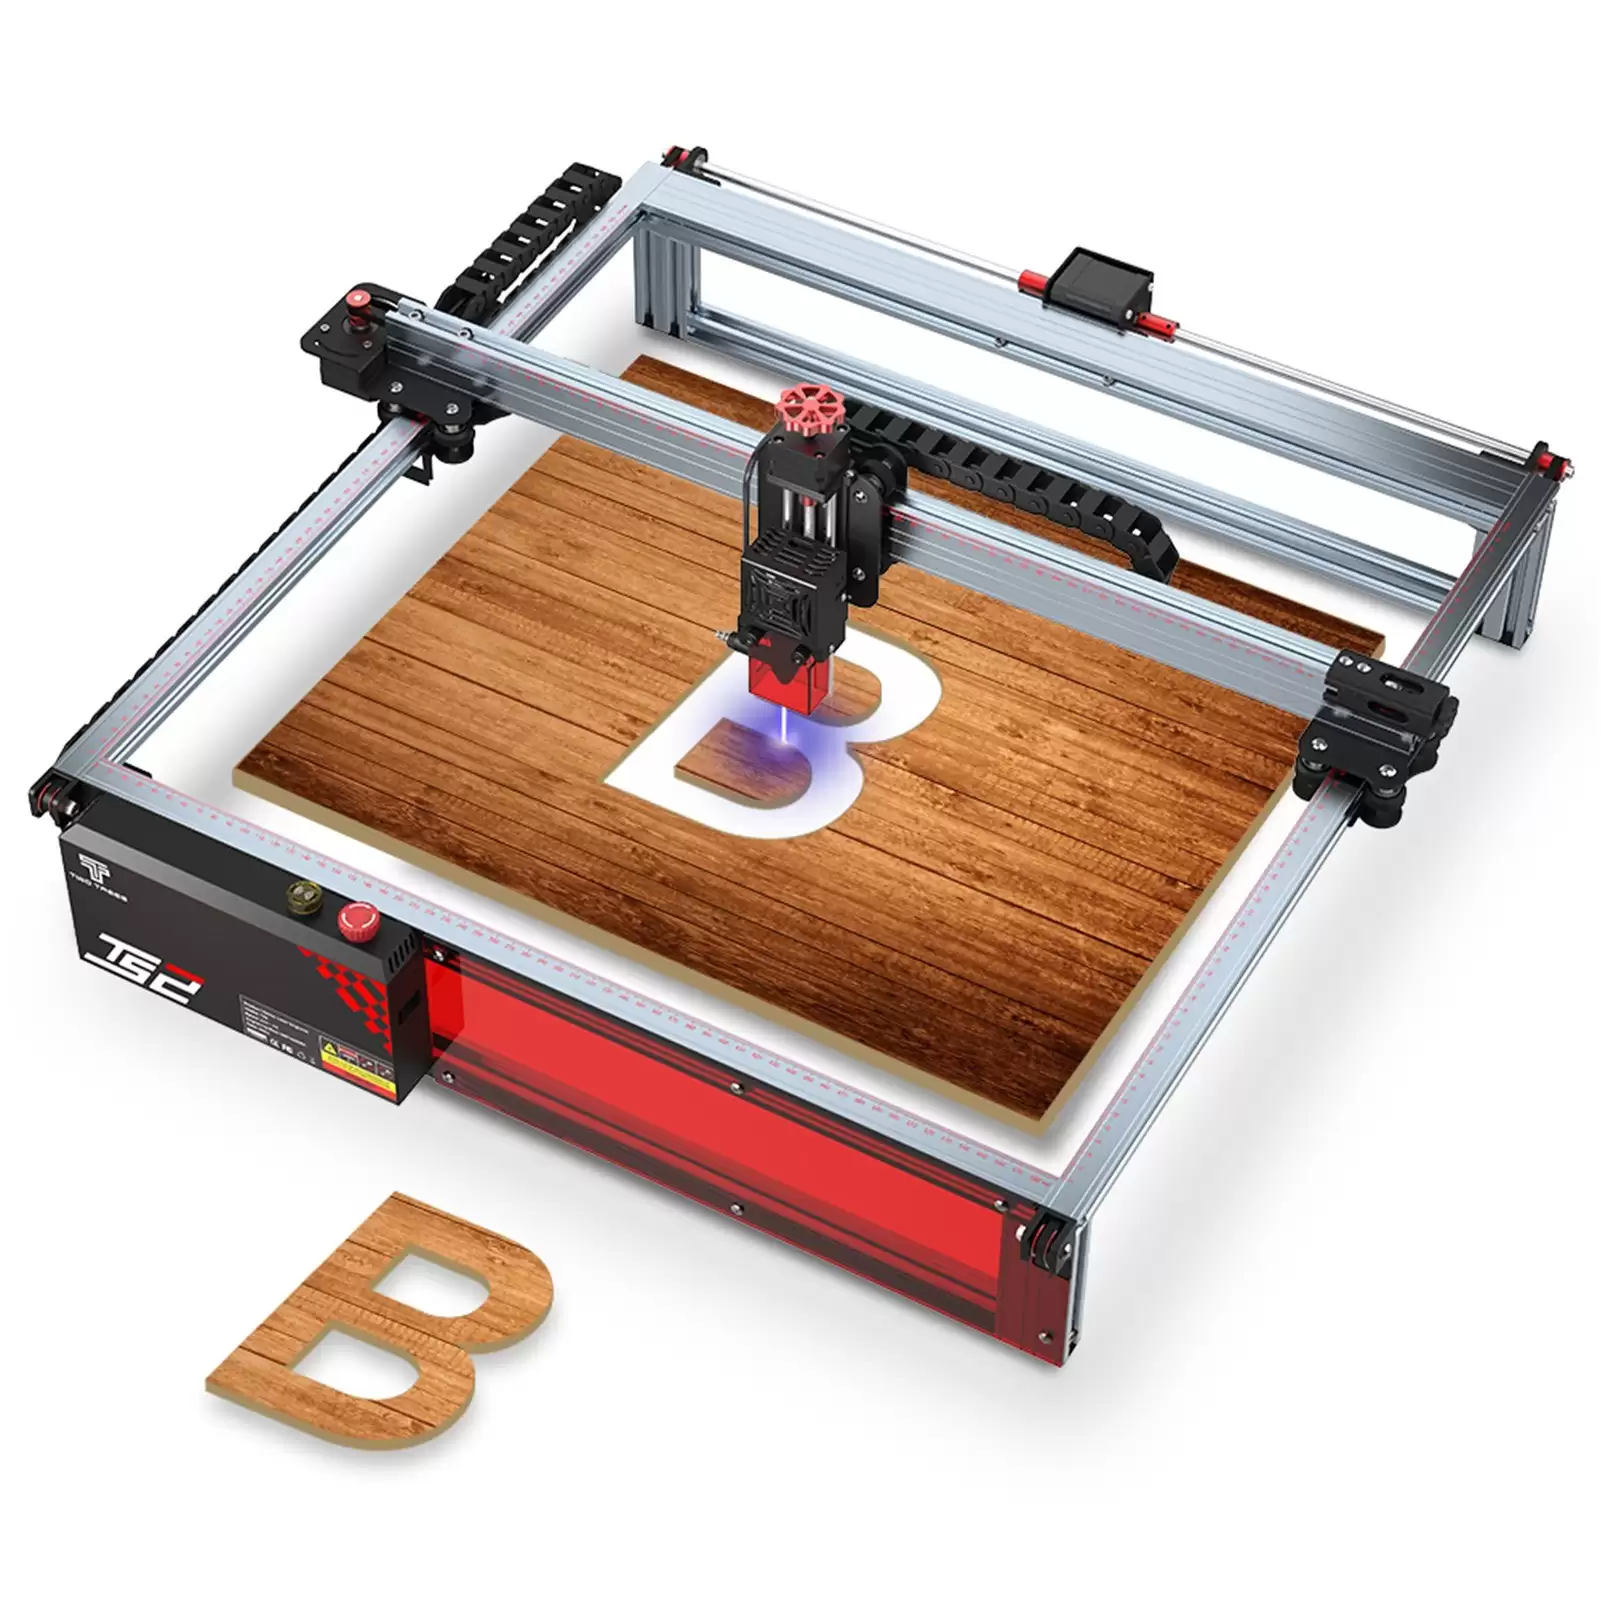 Order In Just $651.43 Two Trees Ts2 Laser Engraver 10w Laser Cutter Using This Tomtop Discount Code